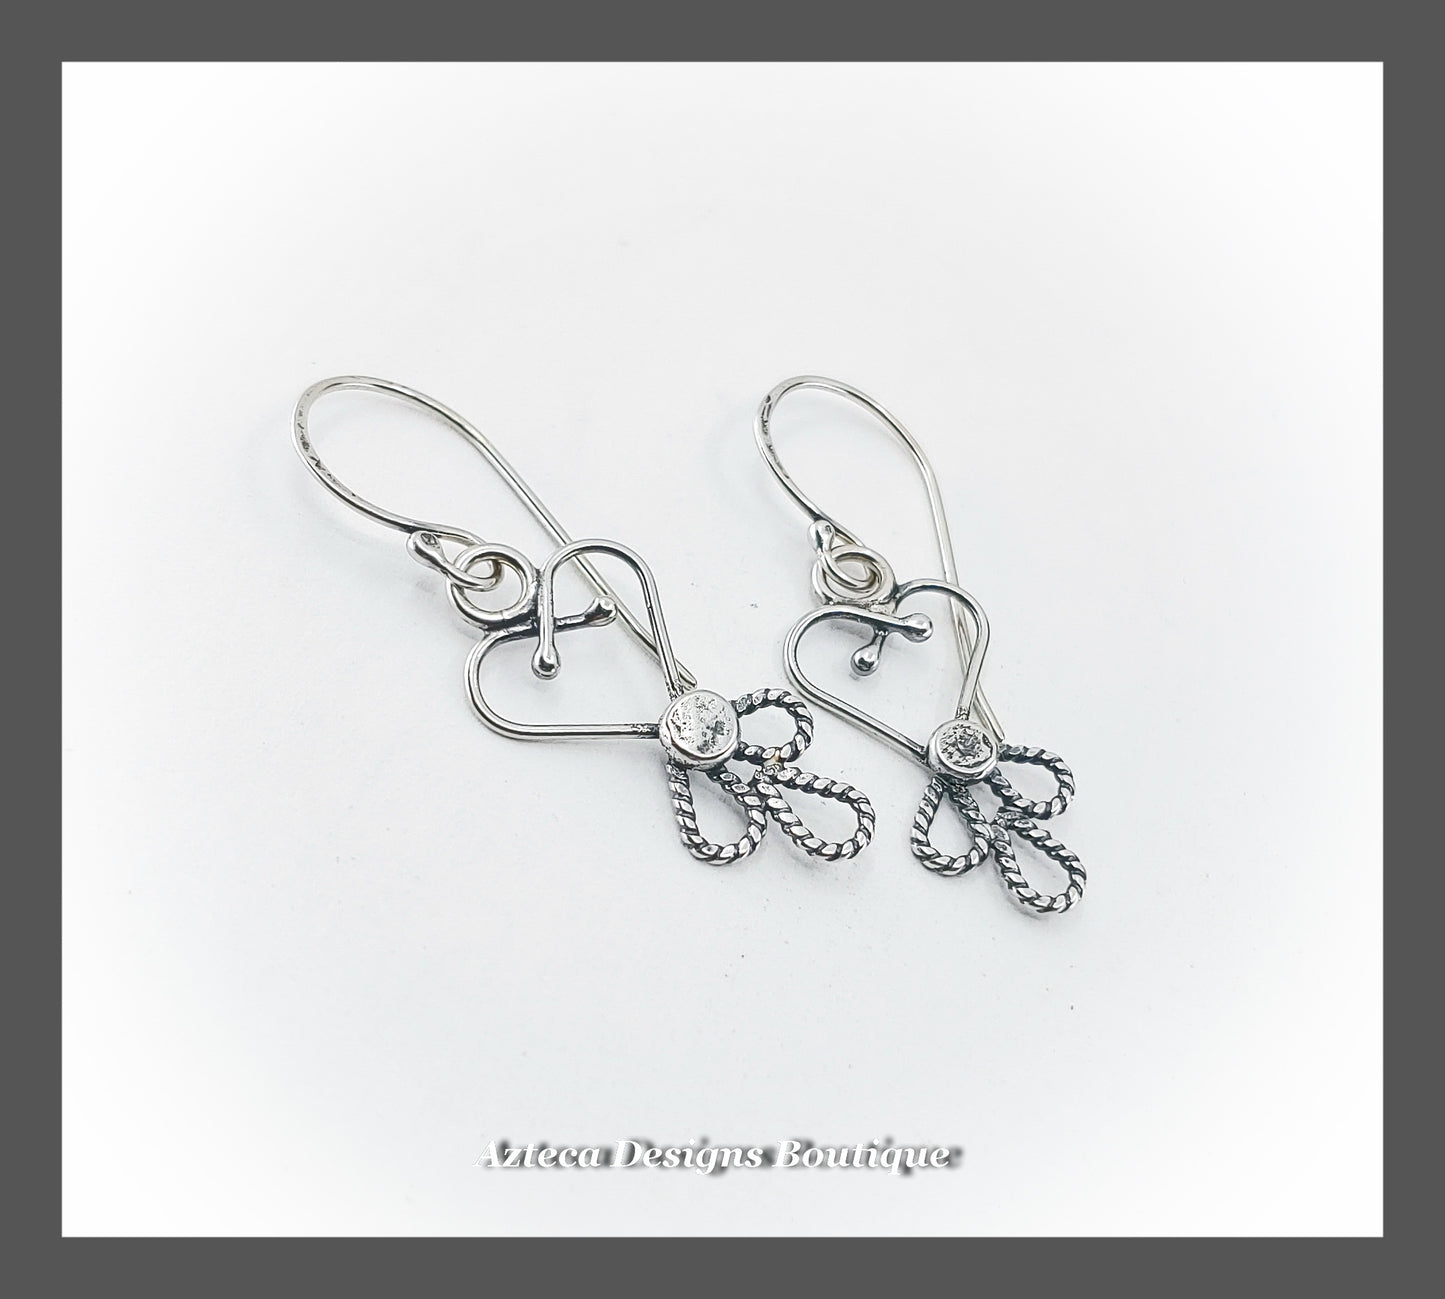 Blooming Hearts + Hand Fabricated Argentium Silver Earrings